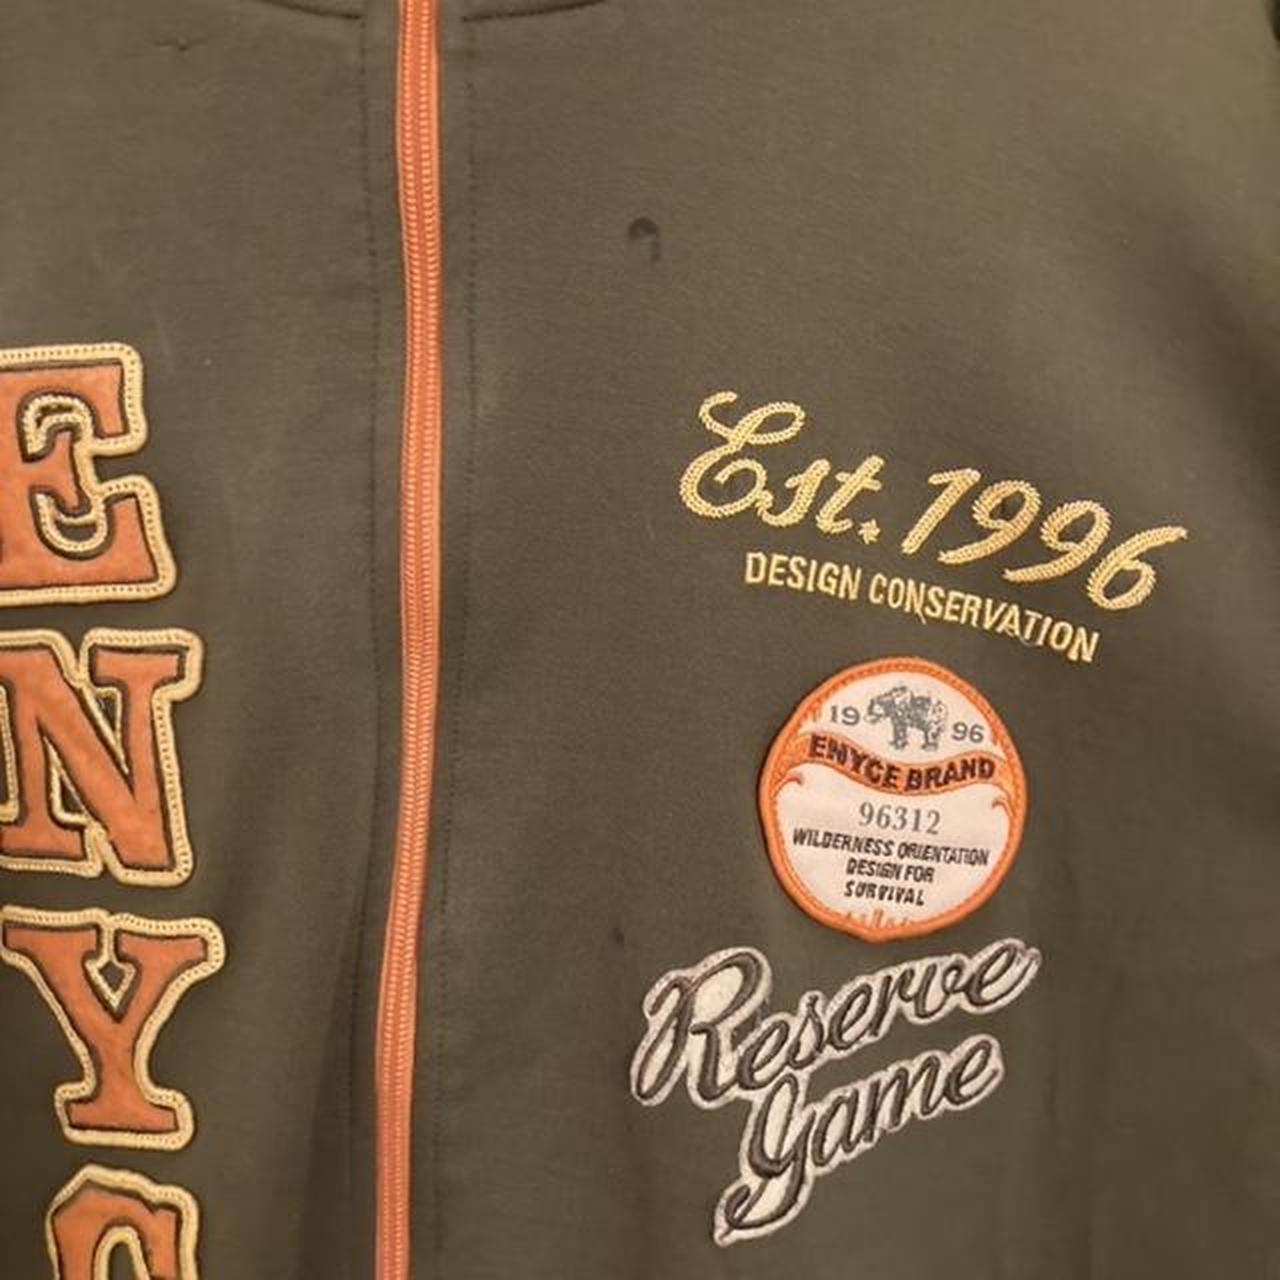 A jacket from P. Diddy’s brand “Enyce” in the 90s.... - Depop